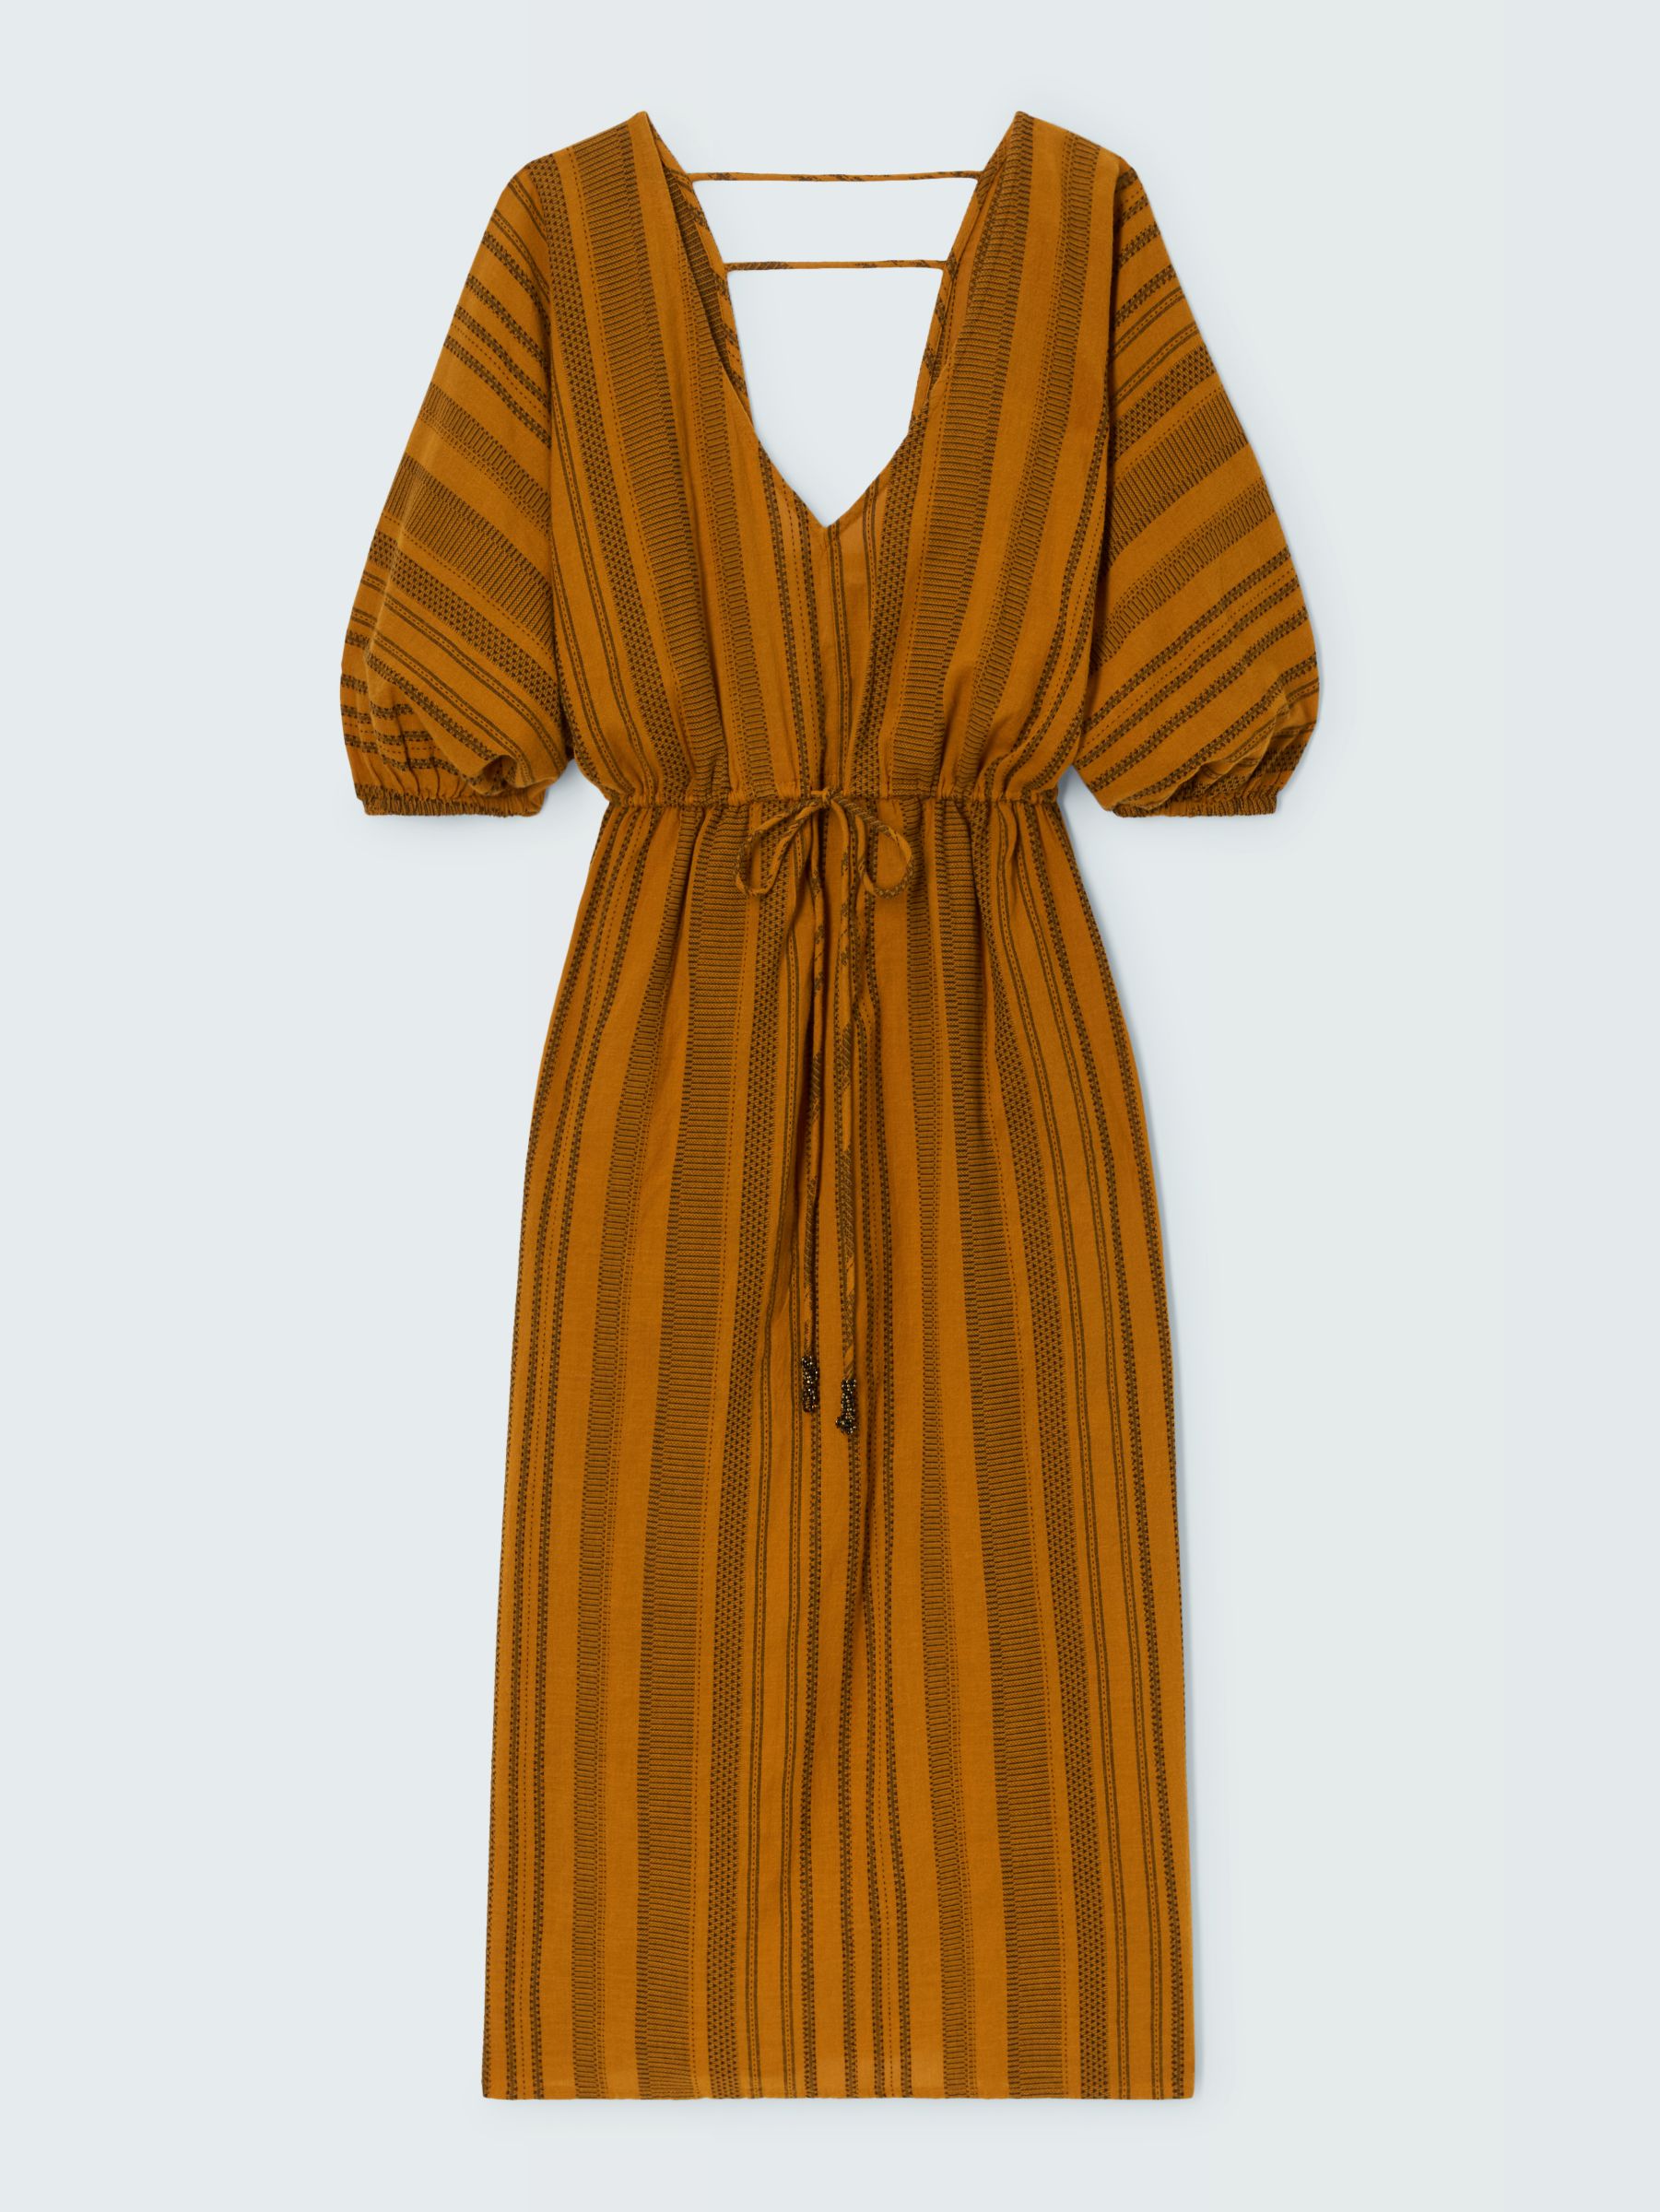 AND/OR Joselyn Jacquard Stripe Dress, Yellow, 8